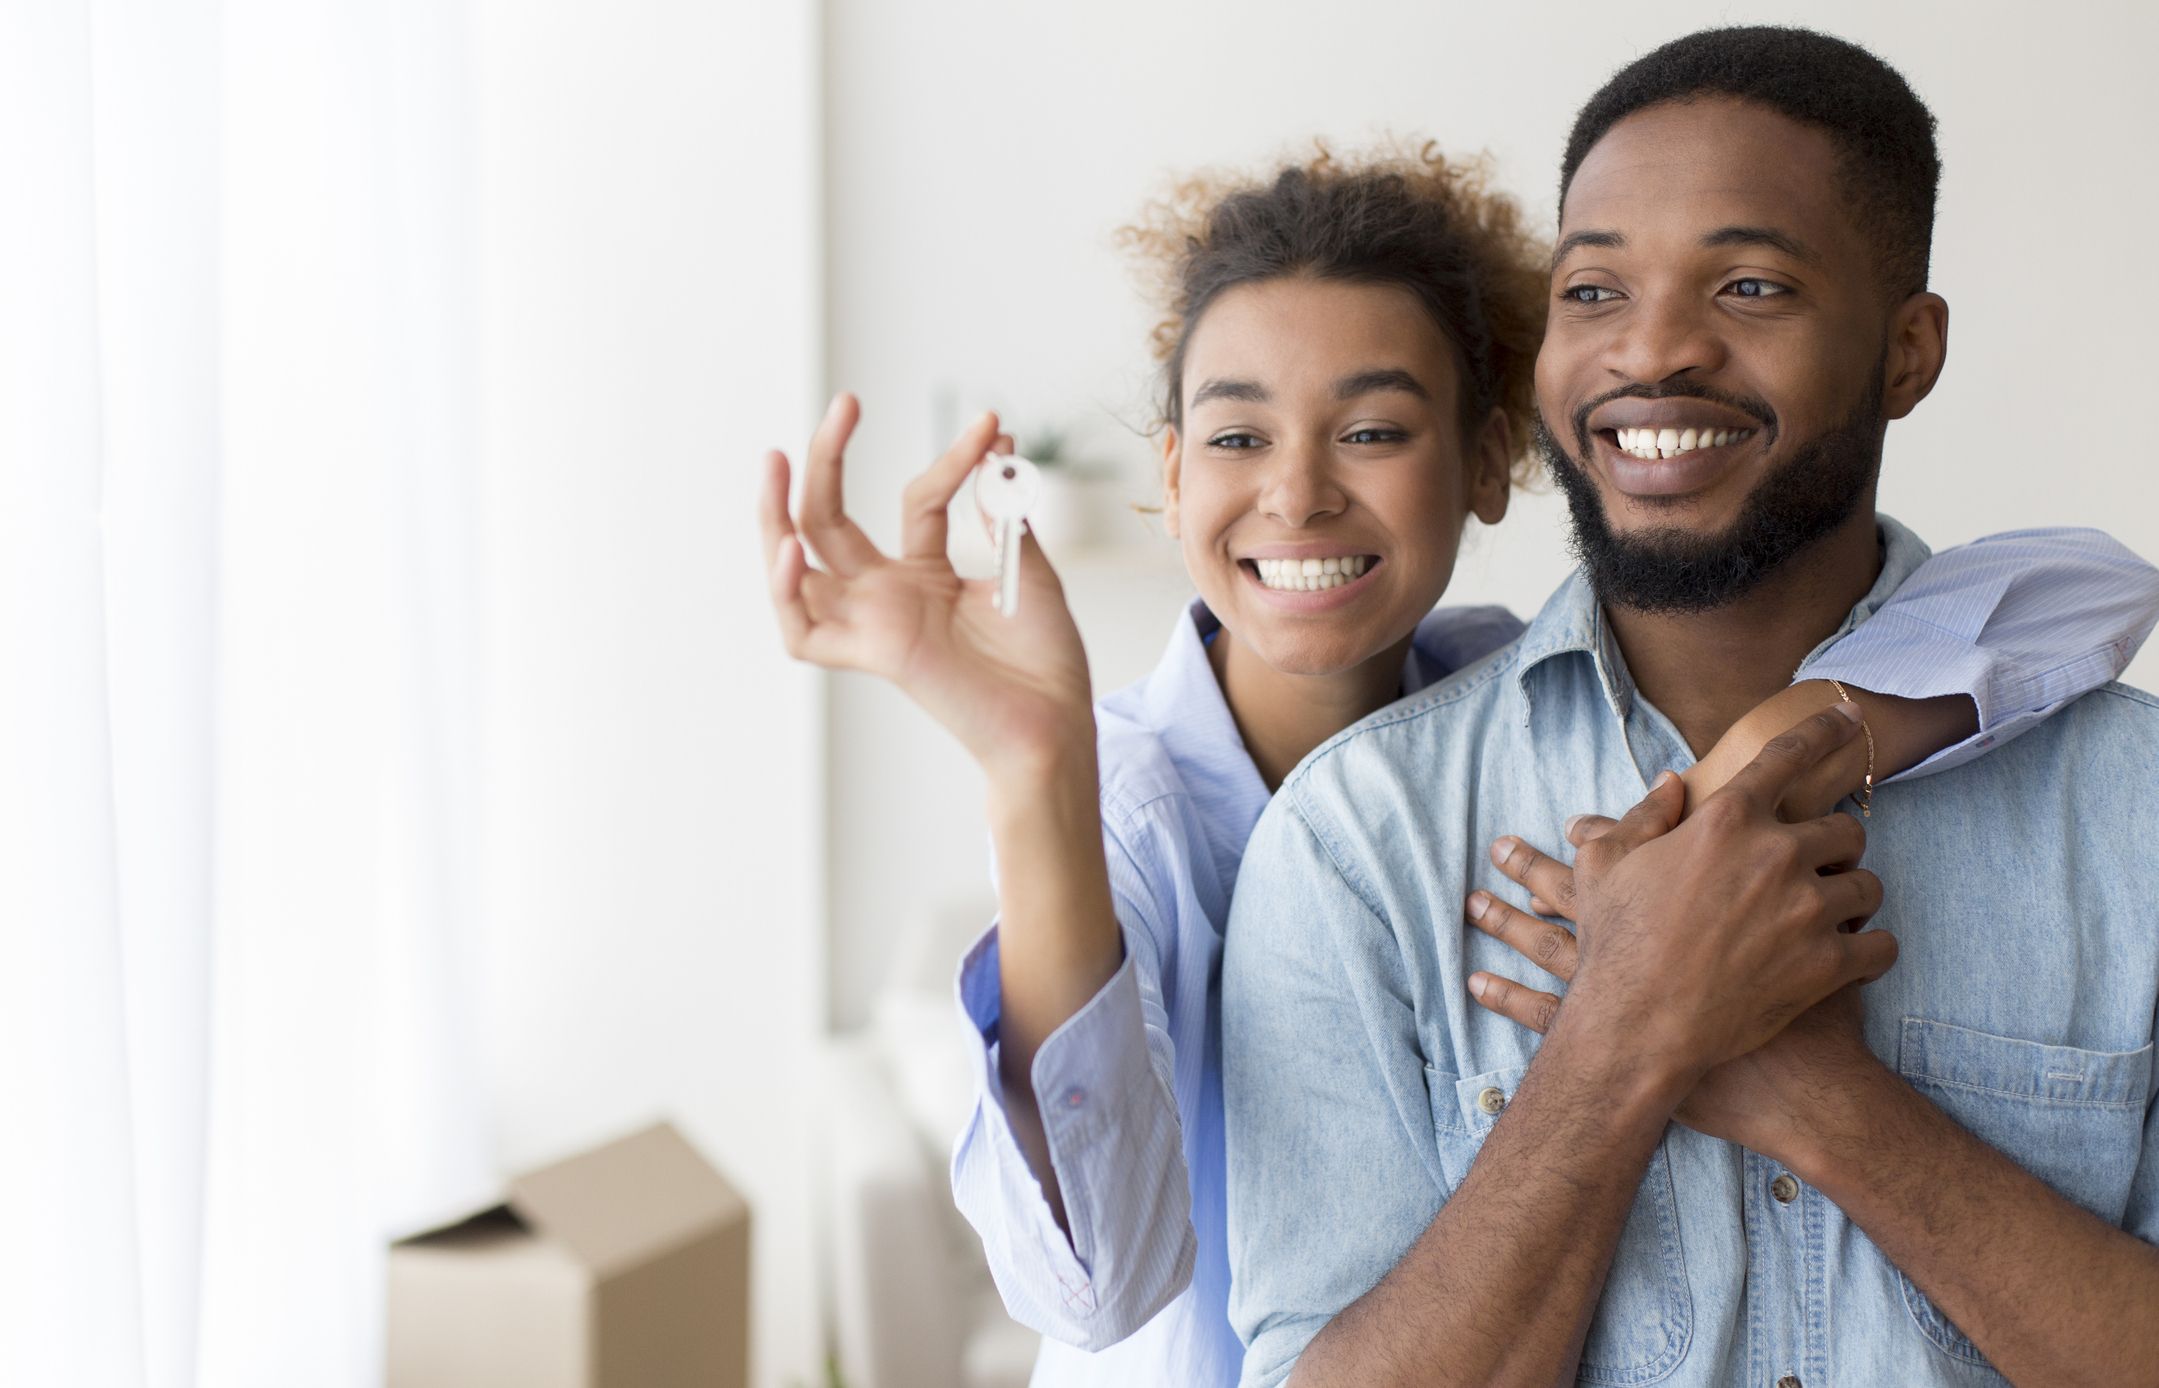 7 Signs You Are Ready to Buy Your First Home